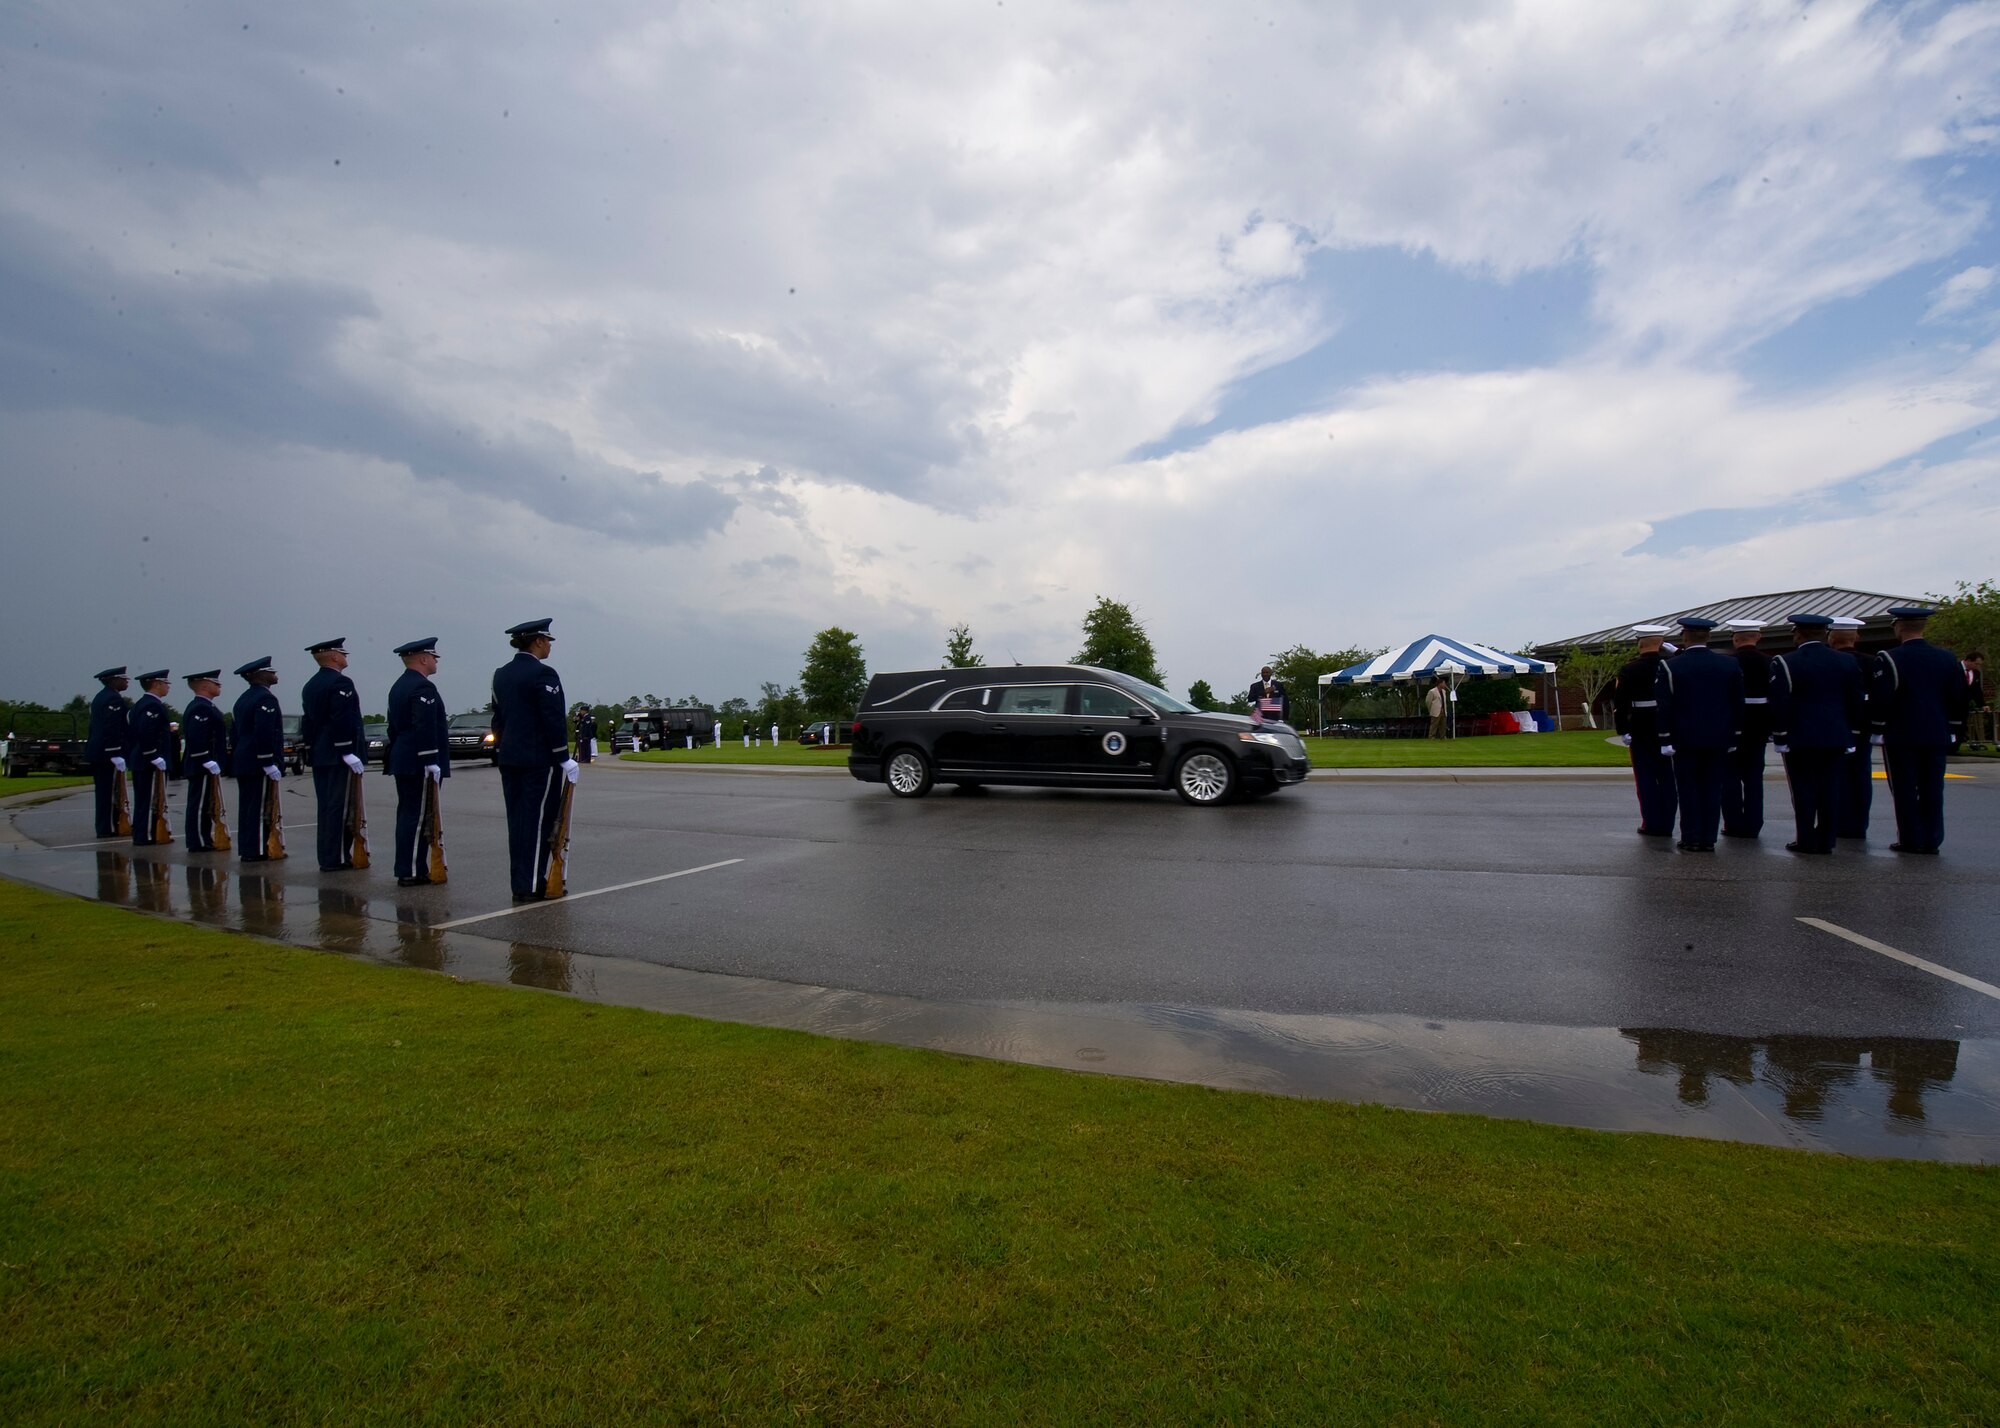 Retired U.S. Air Force Col. George “Bud” Day arrives by hearse to his funeral service at Barrancas National Cemetery on Naval Air Station Pensacola, Fla., Aug. 1, 2013. Day, a Medal of Honor recipient and combat pilot with service in World War II, Korea and Vietnam, passed away July 28 at the age of 88. (U.S. Air Force Photo/Staff Sgt. John Bainter)